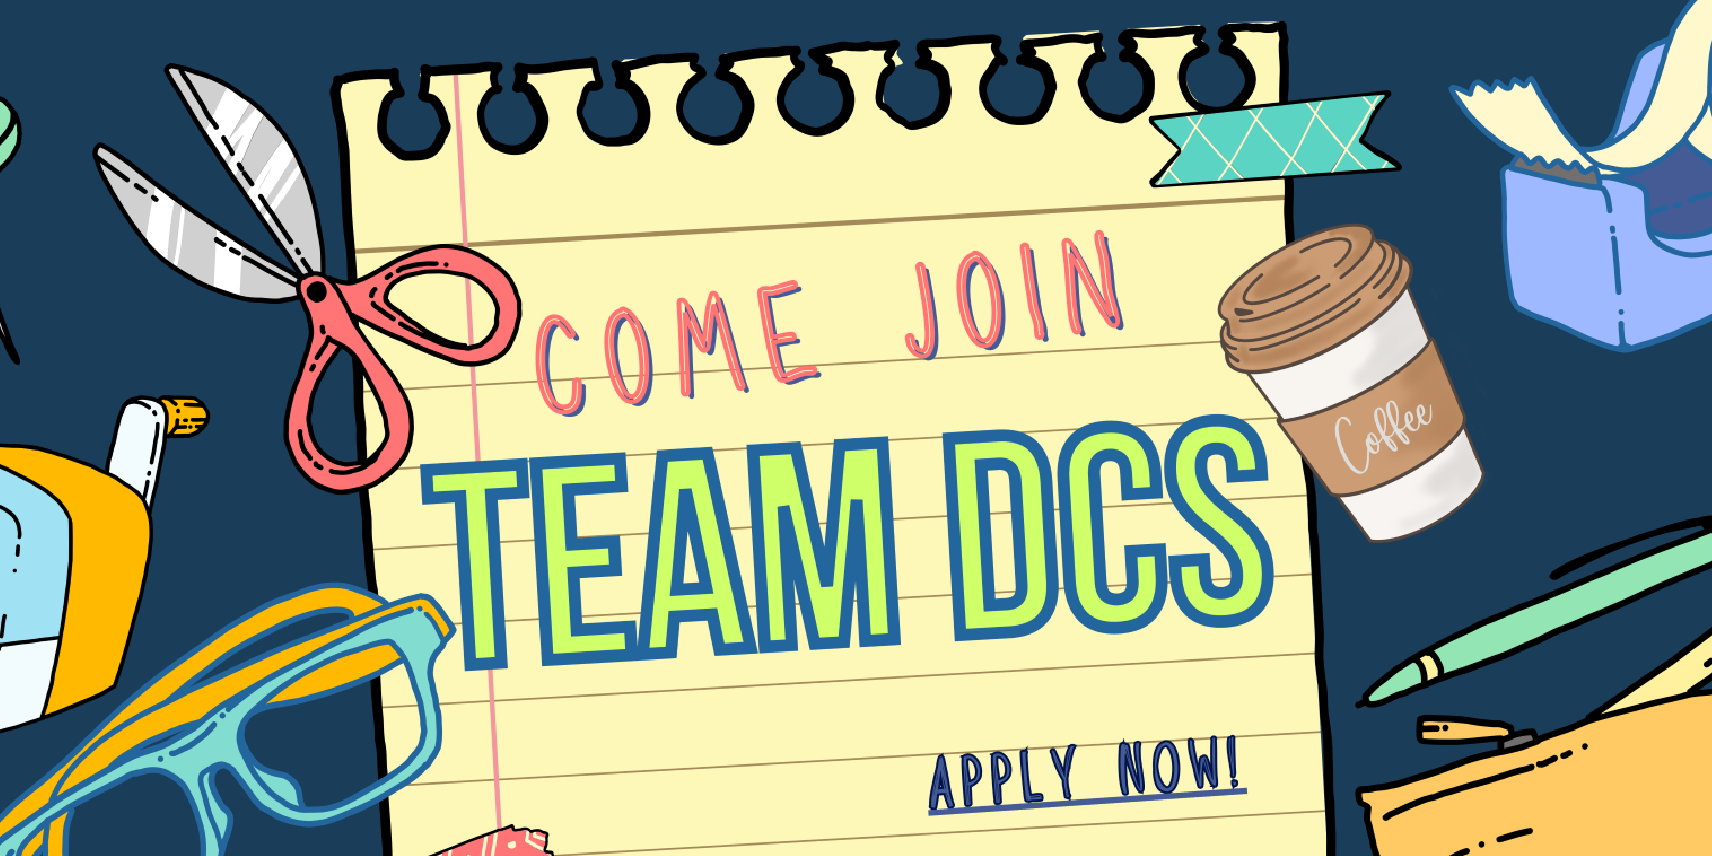 Come Join Team DCS! Apply Now